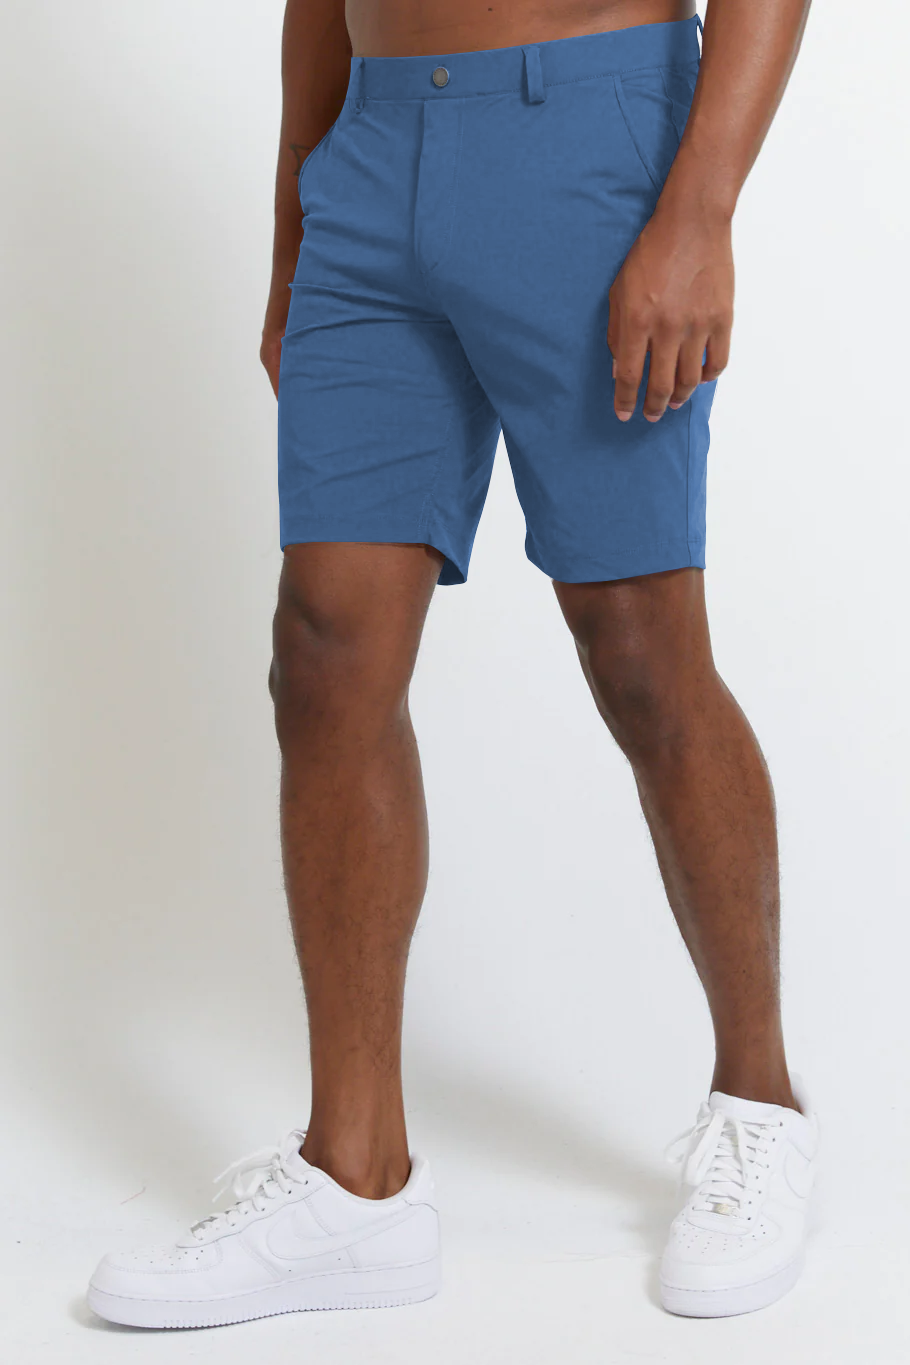 Image of the hanover pull-on short in indigo